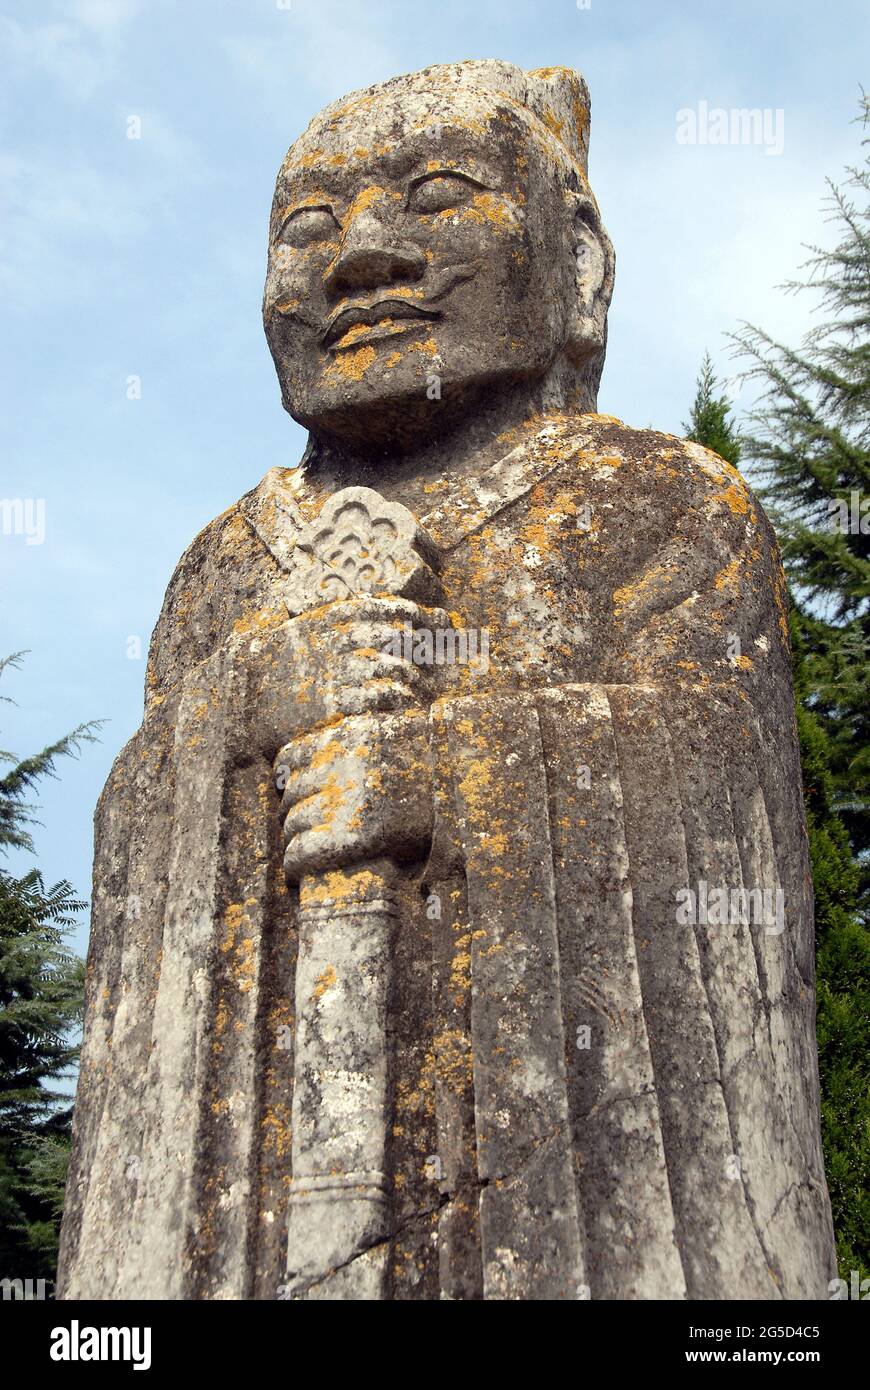 Qianling Mausoleum, Shaanxi Province, China. This site includes the tomb of Wu Zetian, China's only female emperor. Guardian statue on the Spirit Way. Stock Photo